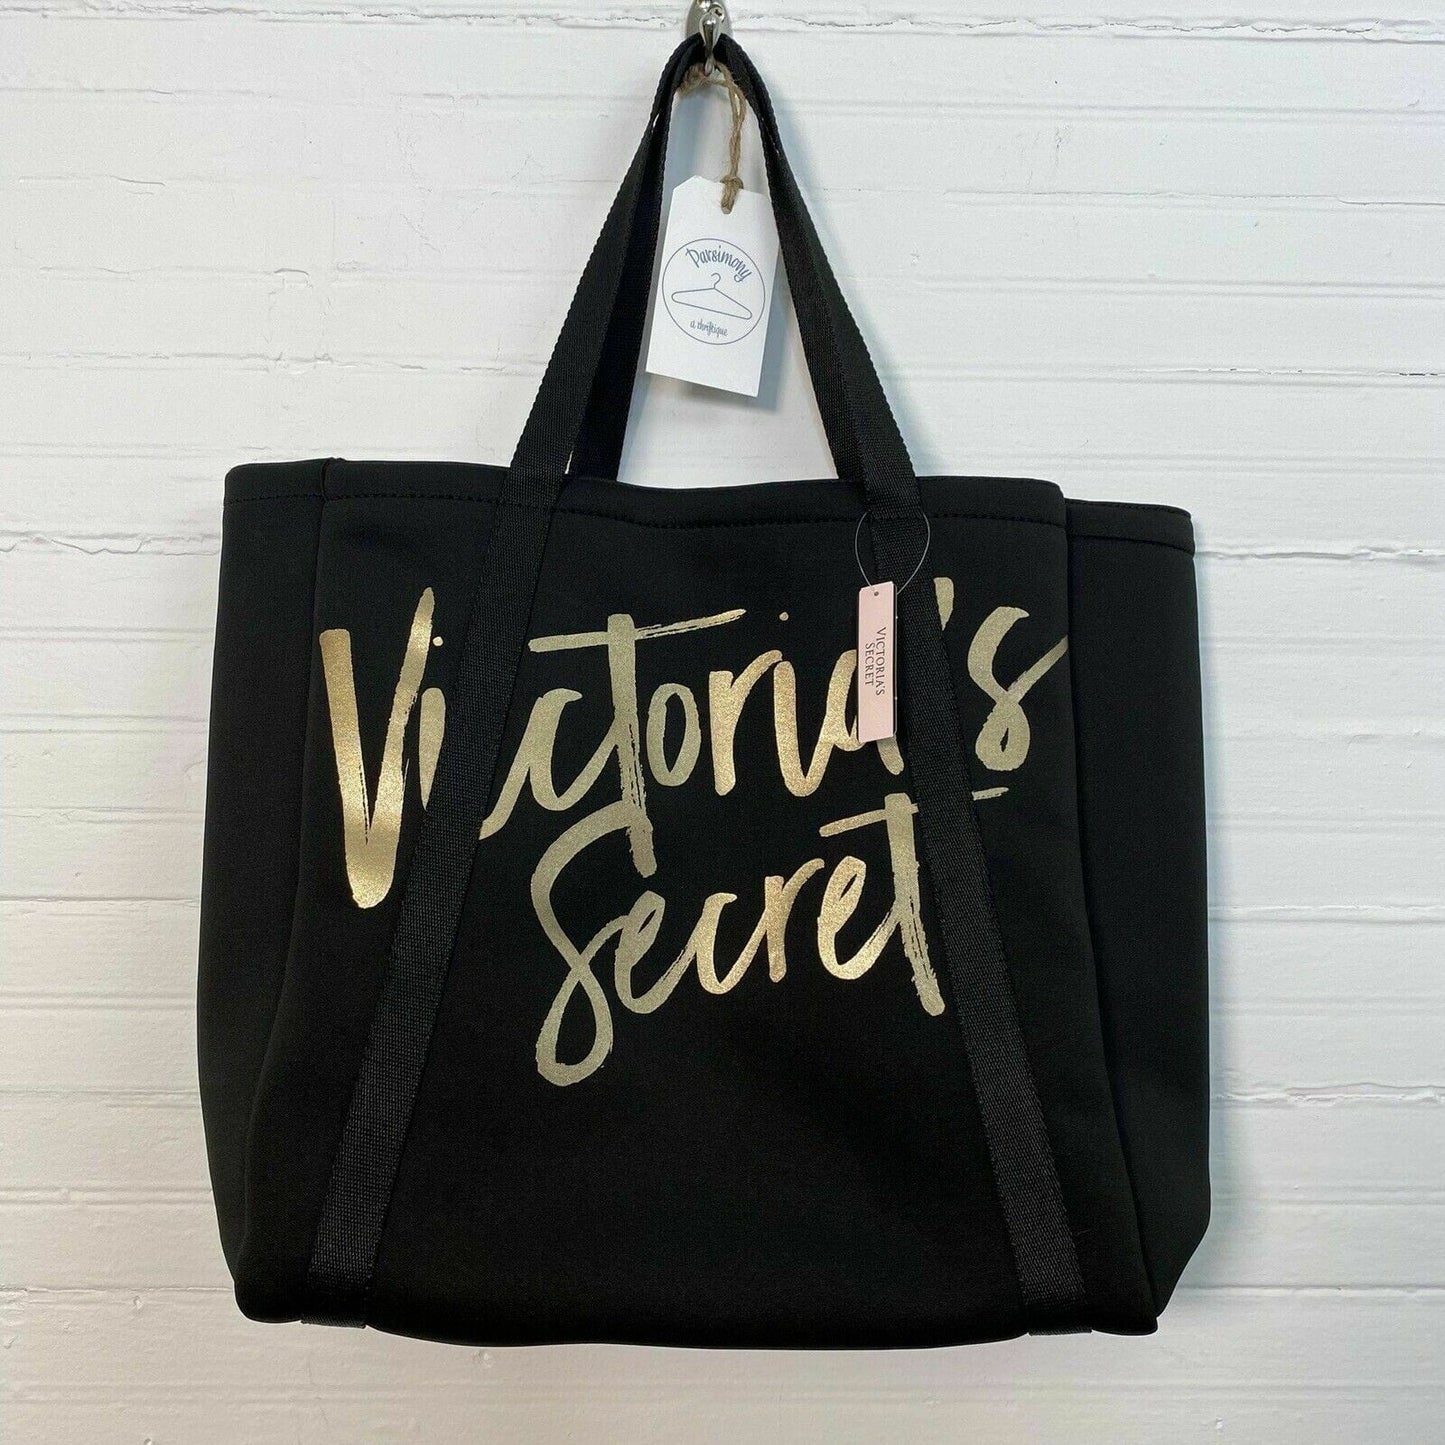 Victoria Secret Insulated Black/Gold Beach Beverage Cooler Carryall Tote Bag NWT